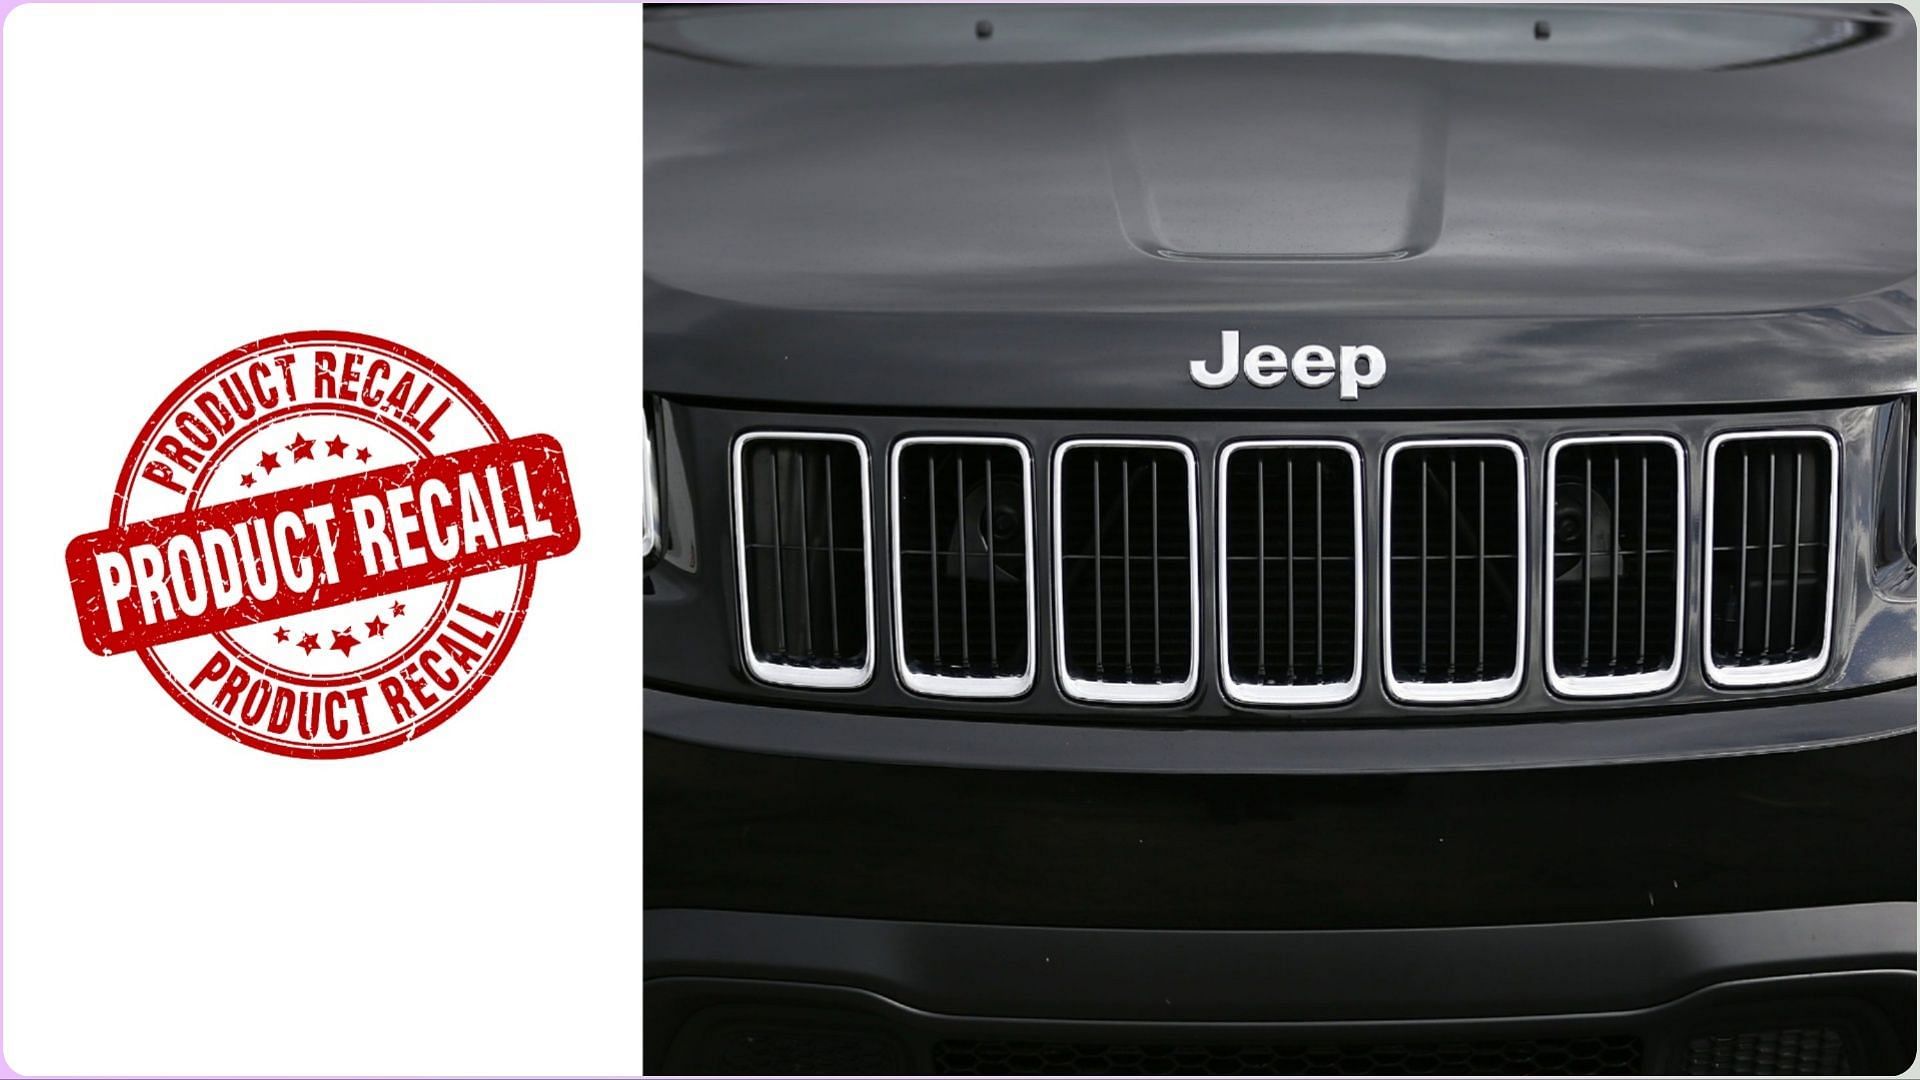 Jeep recalls Jeep Grand Cherokee SUVs over an issue with rear coil springs (Image via Joe Raedle /Getty Images)